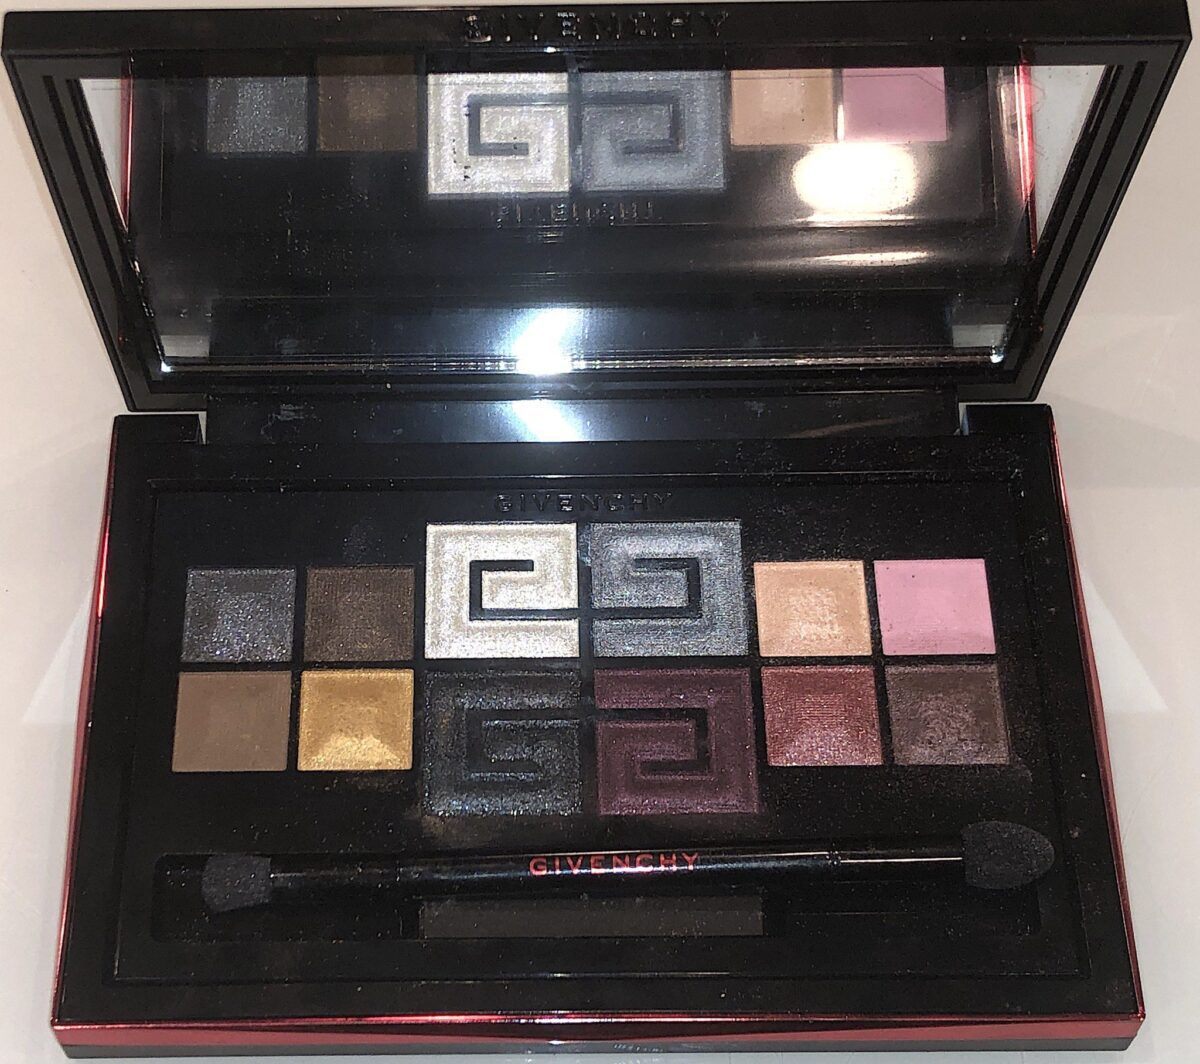 THE PALETTE HAS A LARGE MIRROR AND A DOUBLE ENDED EYESHADOW BRUSH